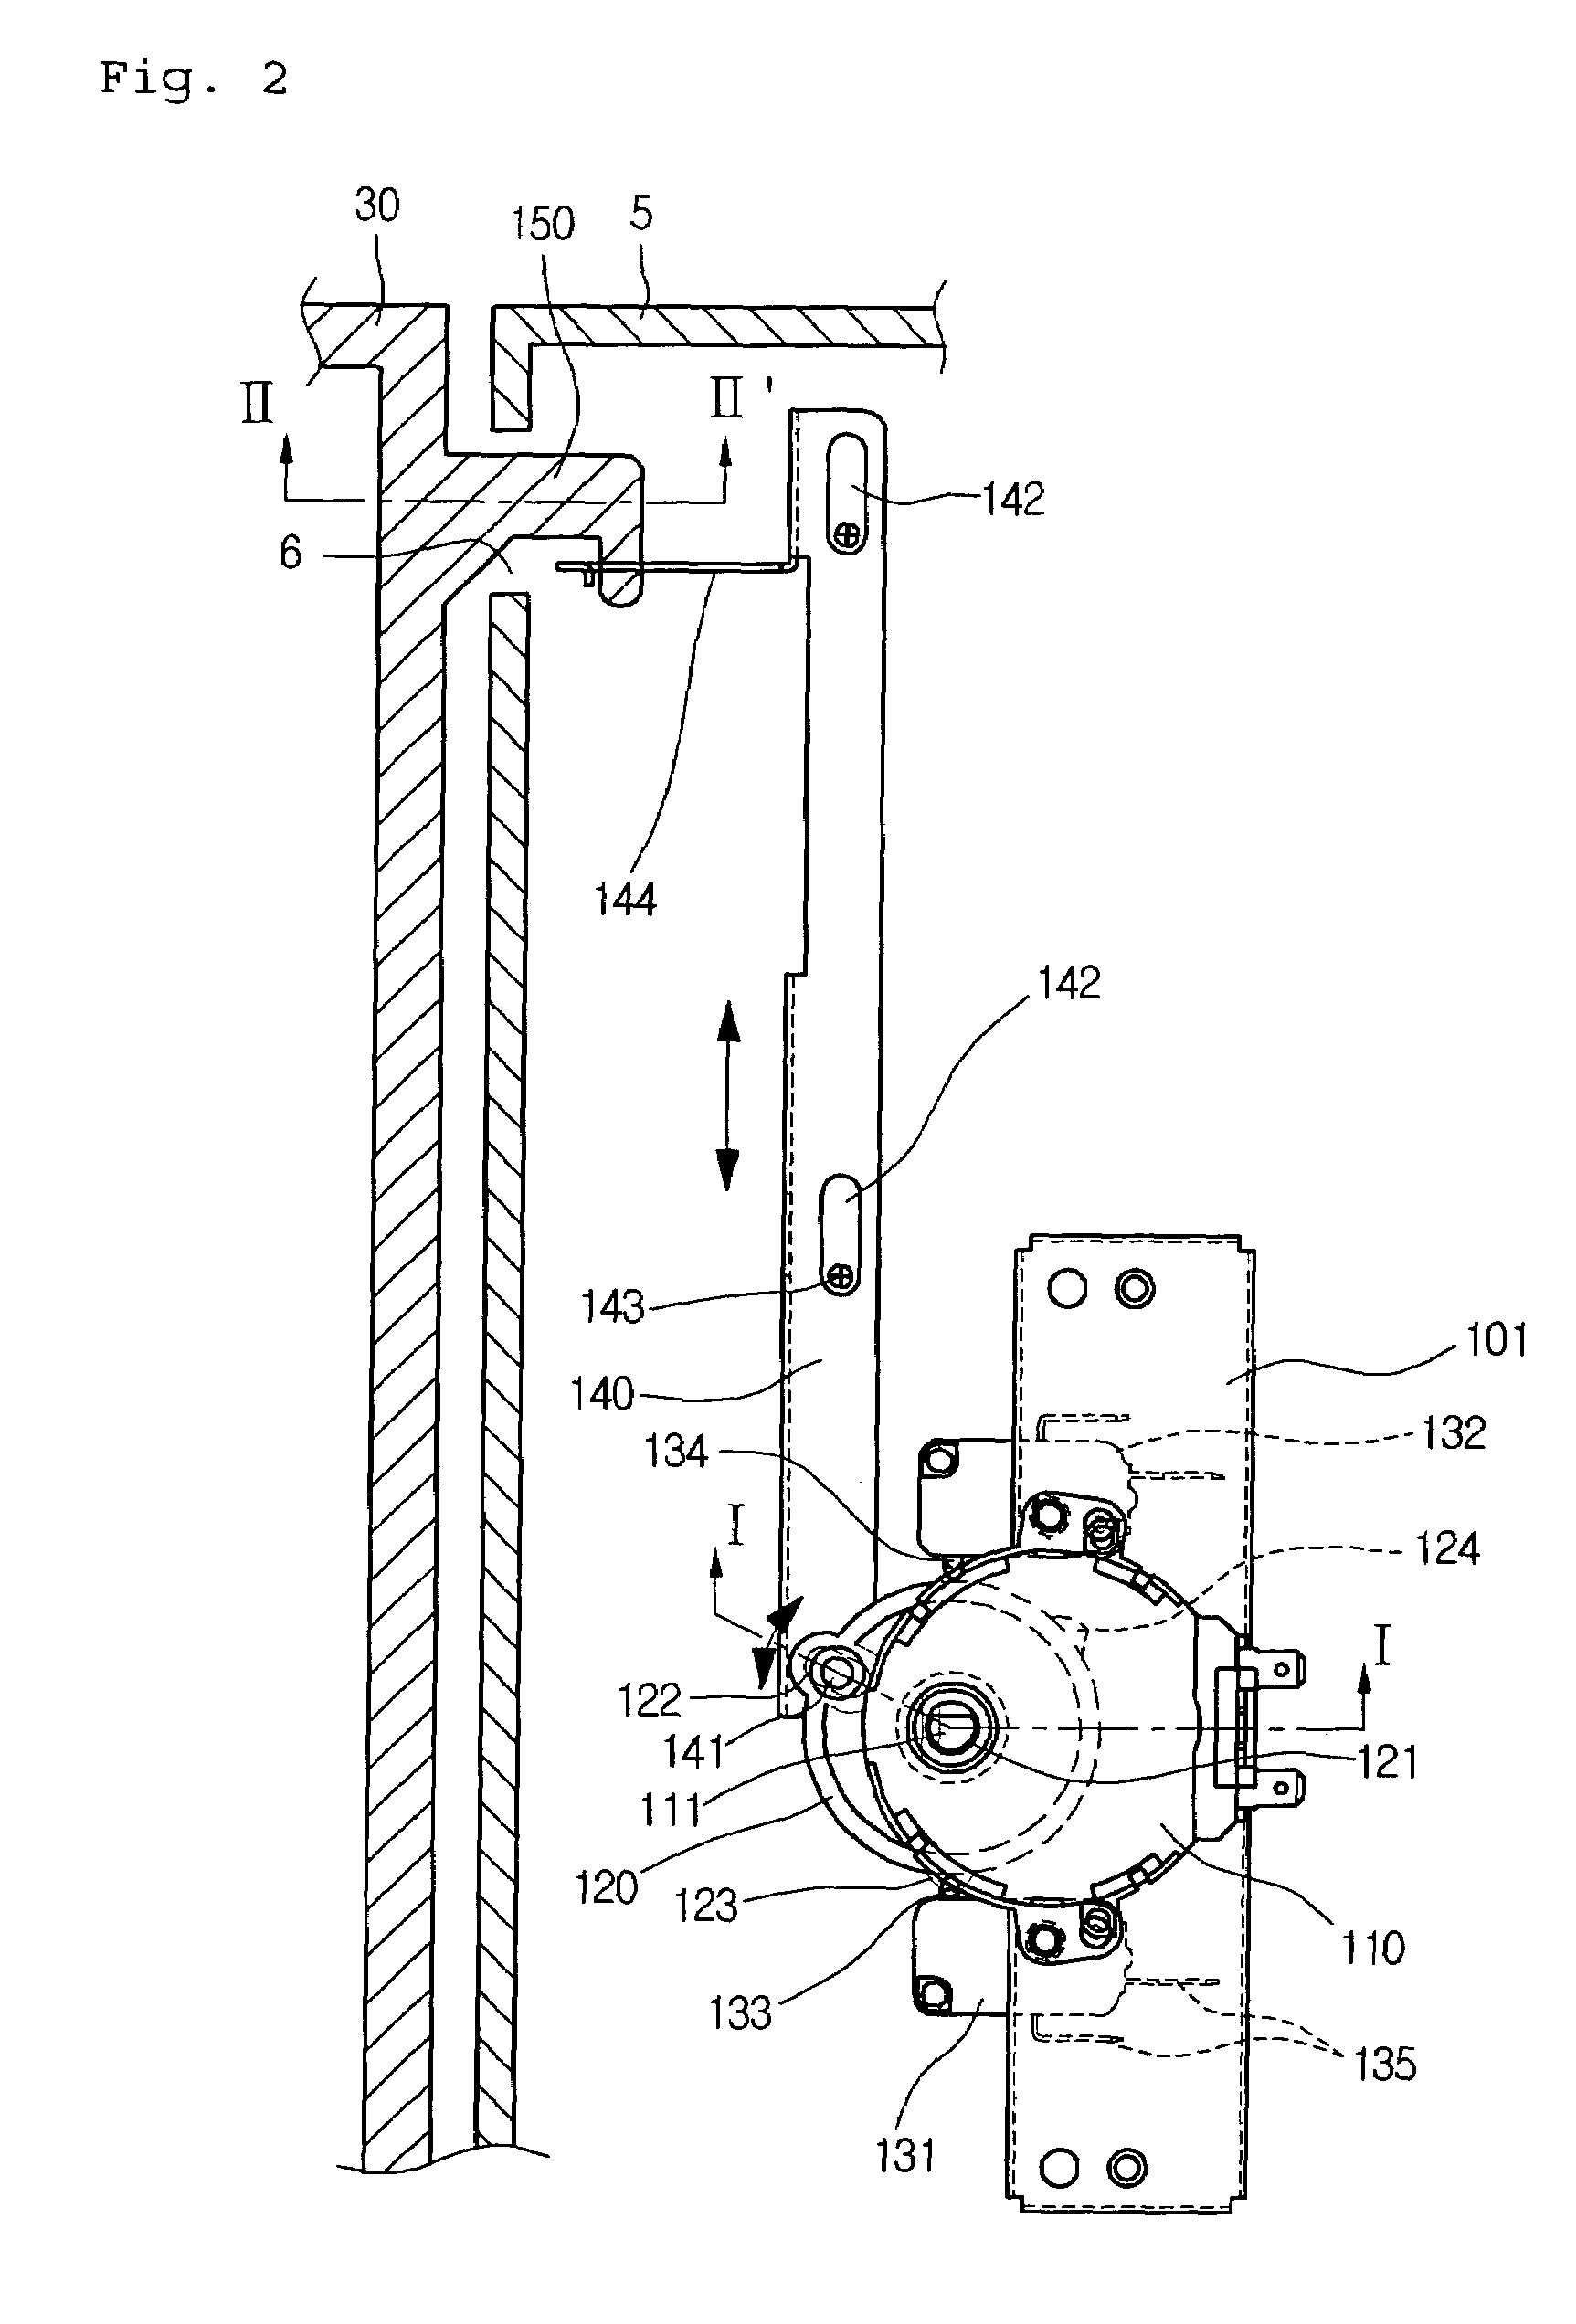 Door opening and closing system in electric oven